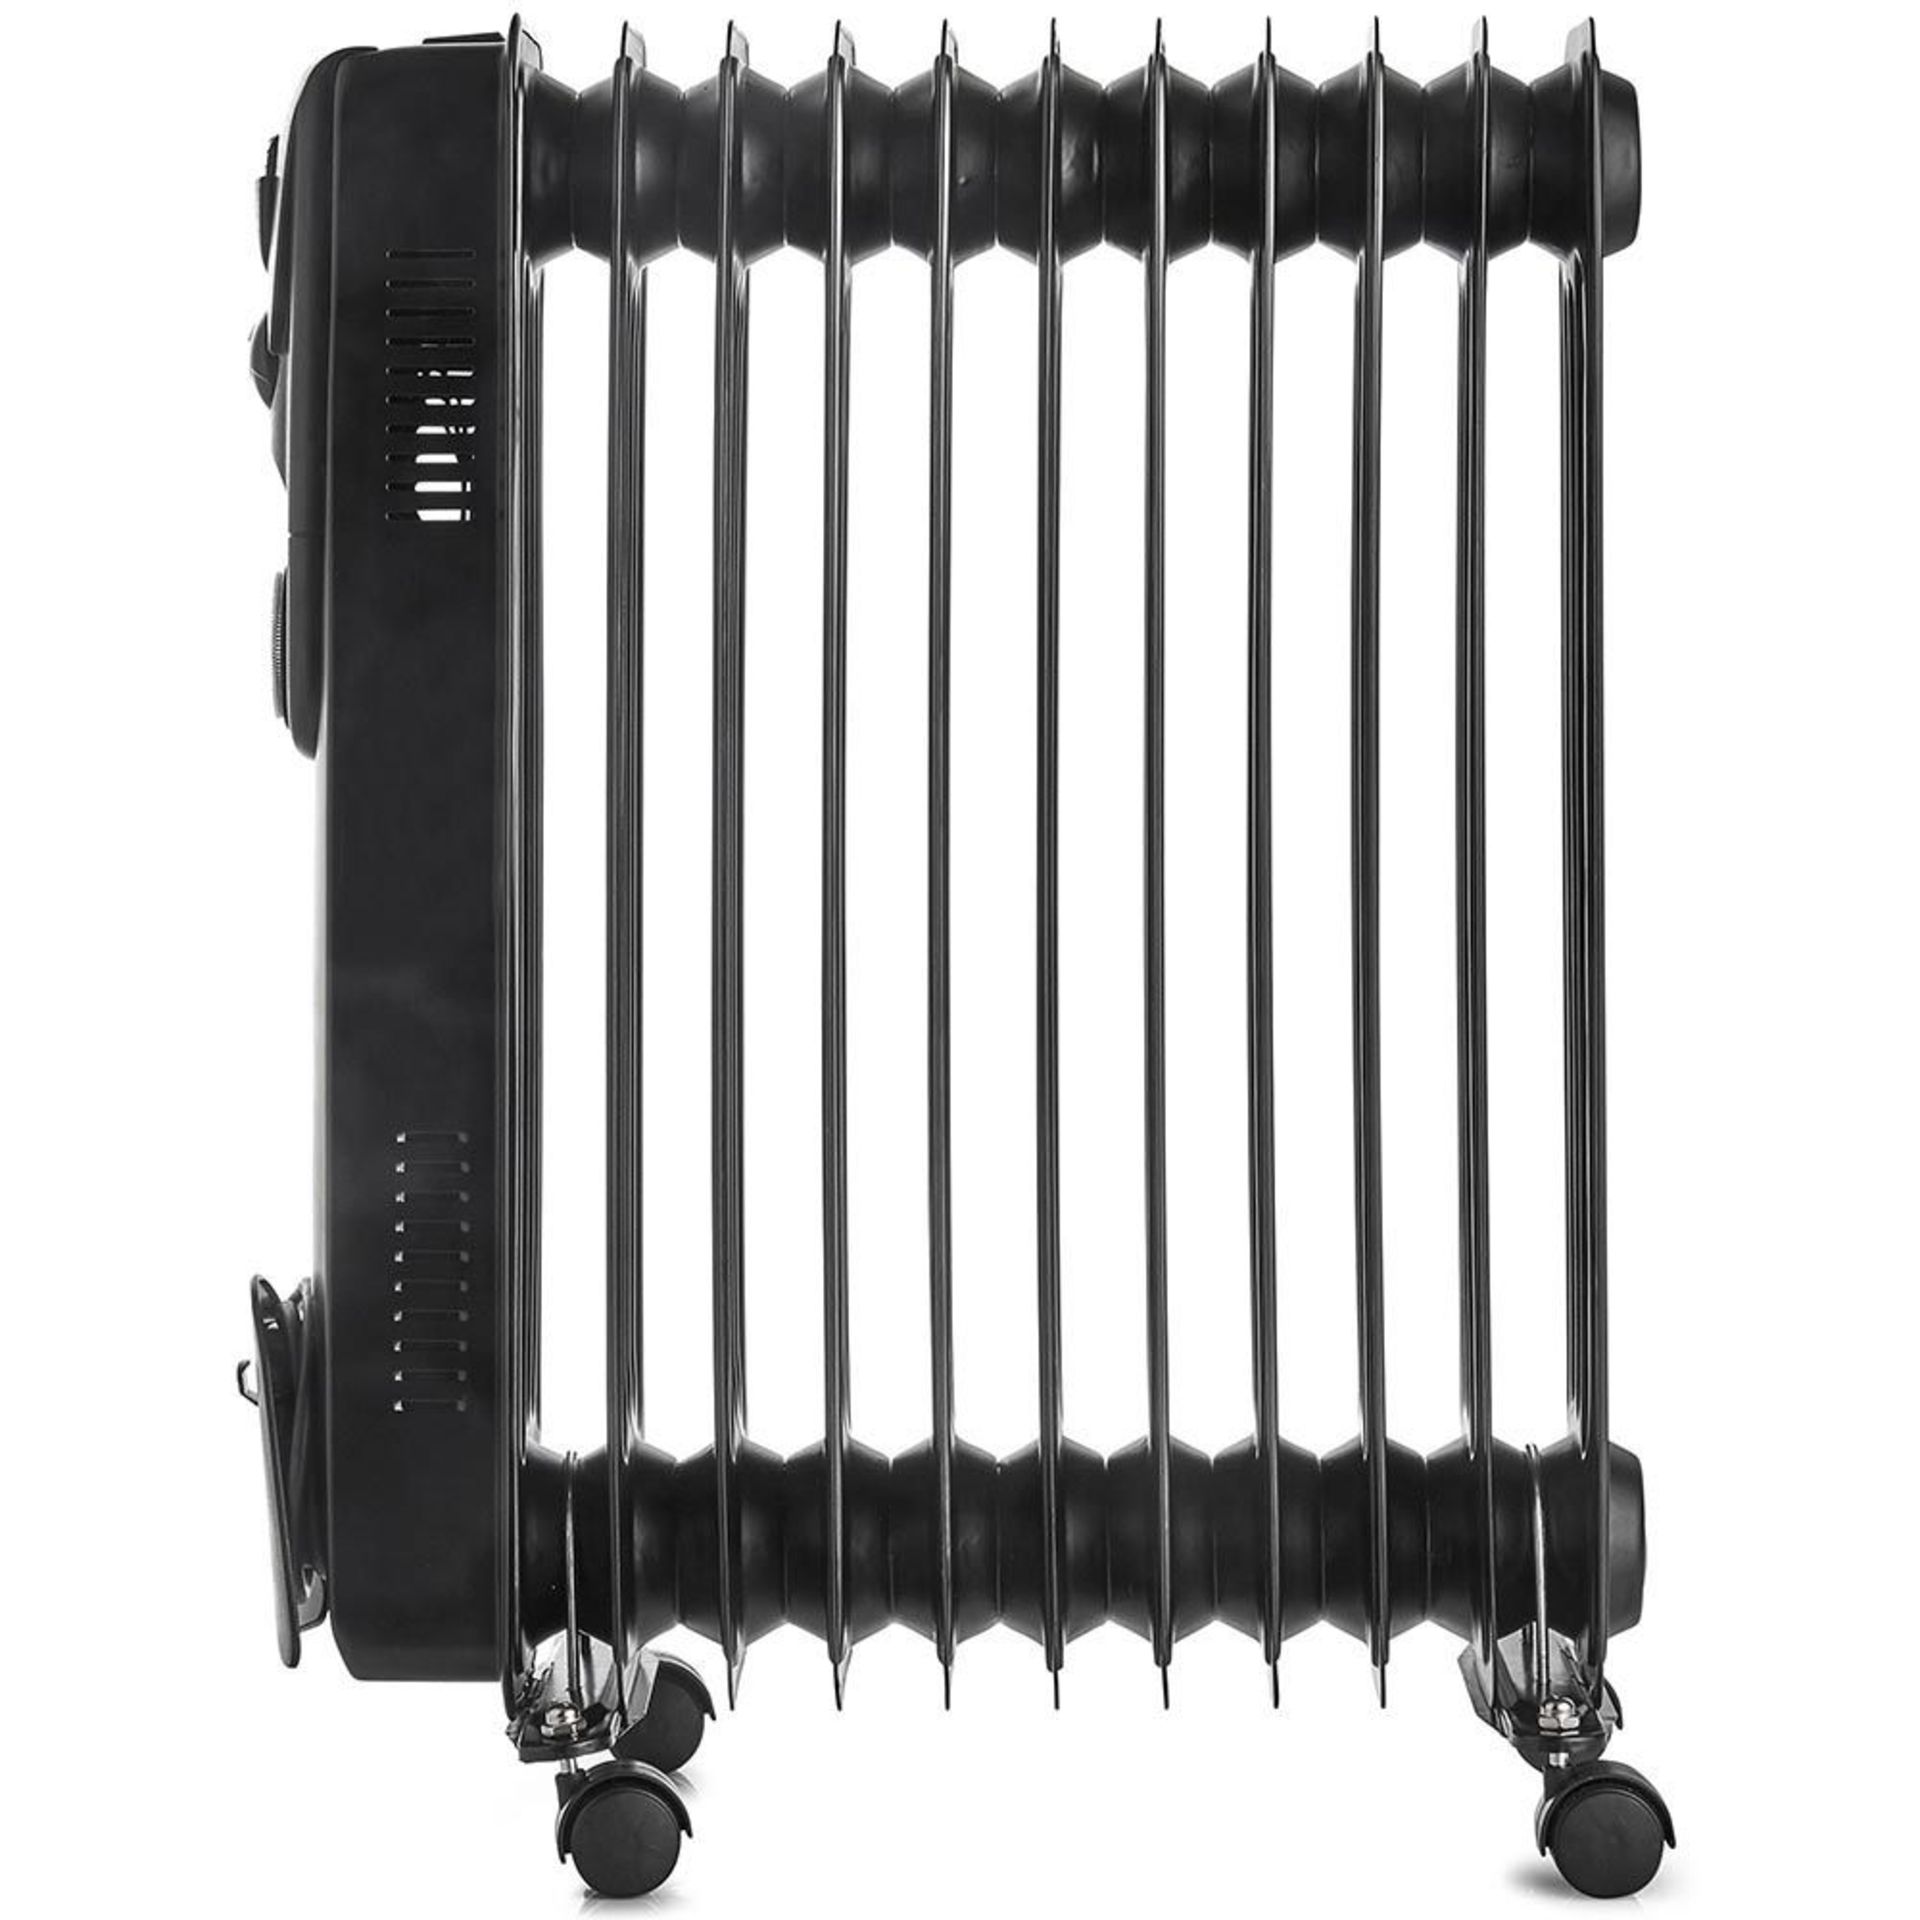 11 Fin 2500W Oil Filled Radiator - Black 2500W radiator with 11 oil-filled fins for heating mid to - Image 4 of 4